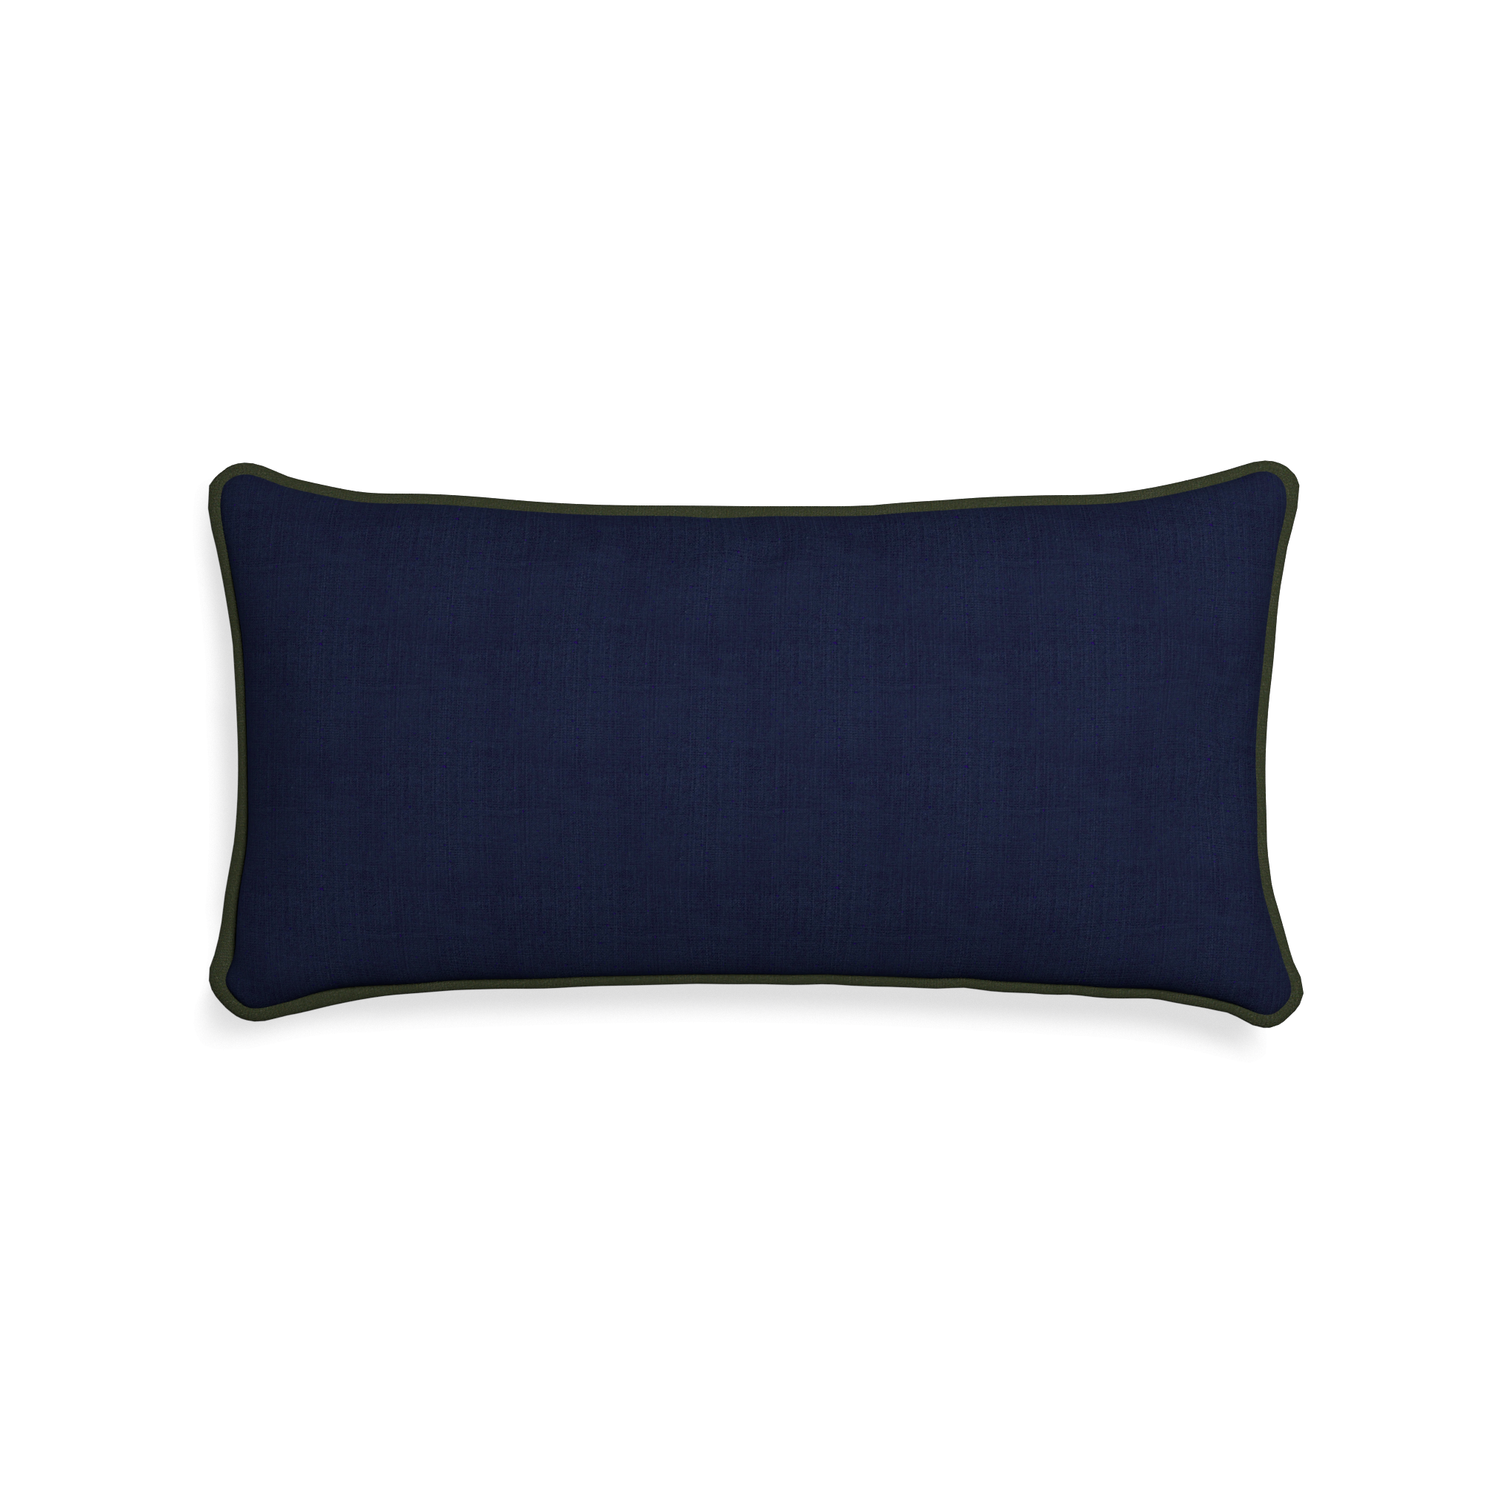 Midi-lumbar midnight custom navy bluepillow with f piping on white background